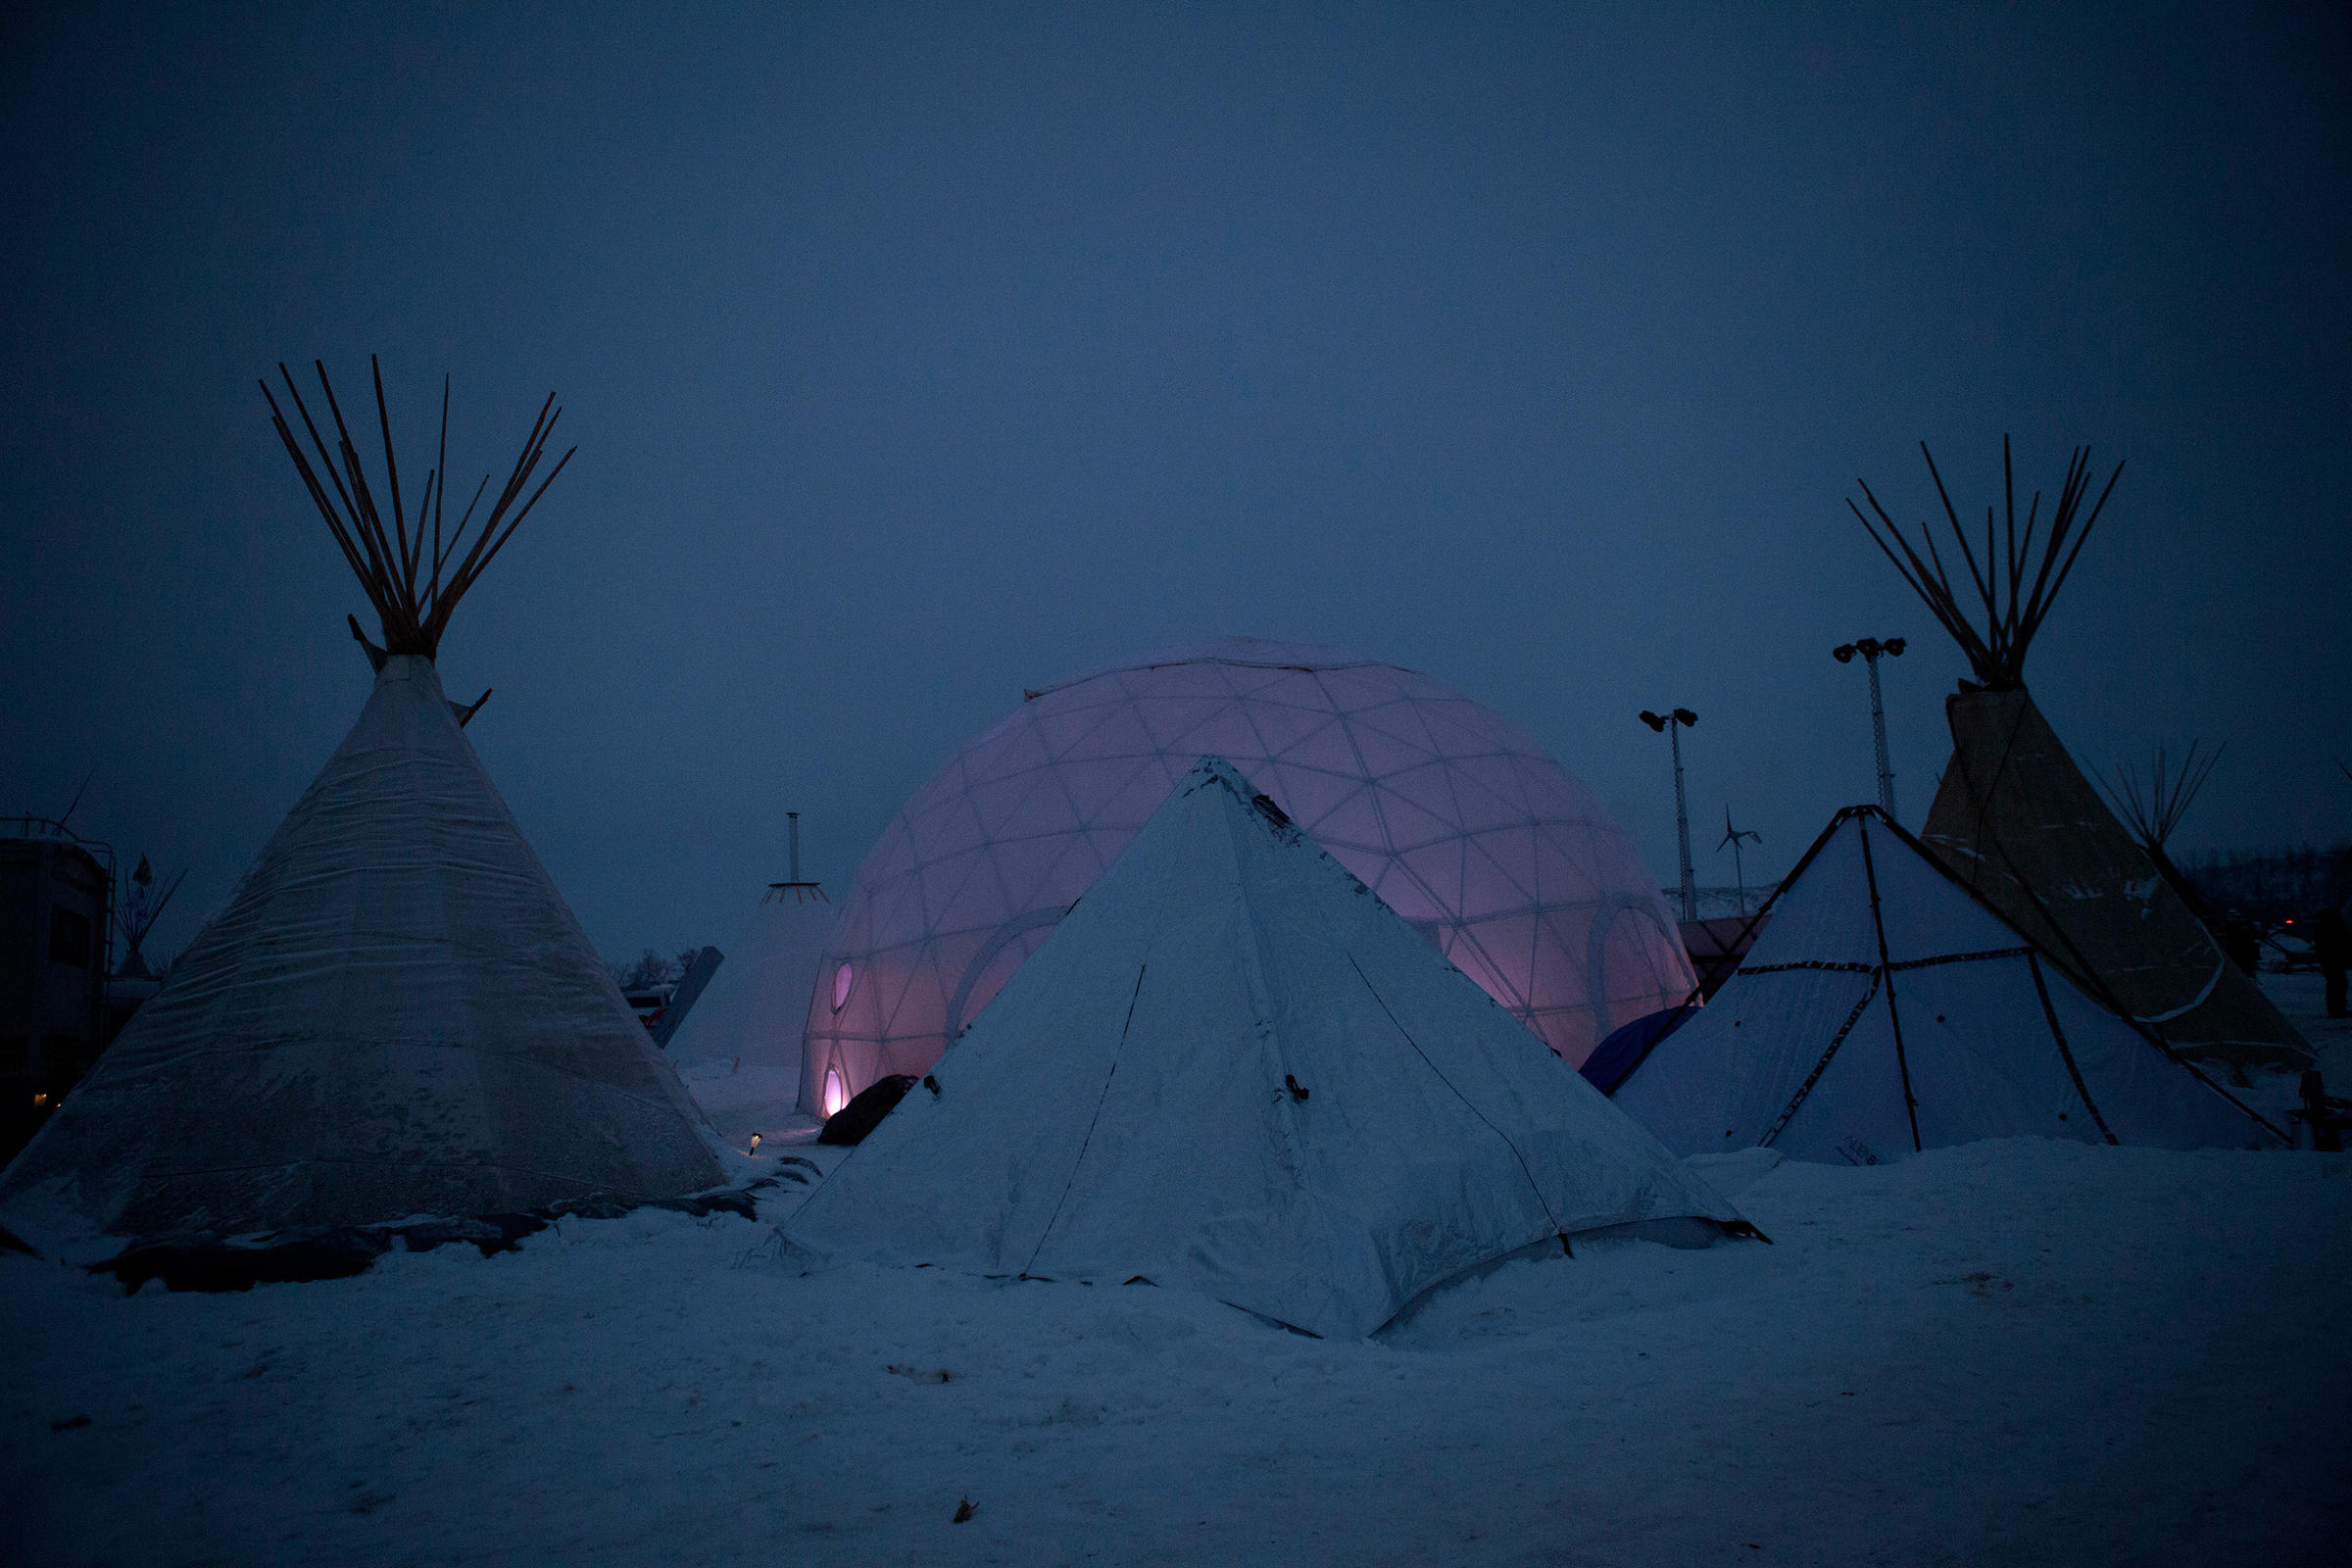 A geodesic dome, which was donated in October, now serves as a community gathering space. It is one of many structures that have been erected in the camp to prepare for the long winter ahead.